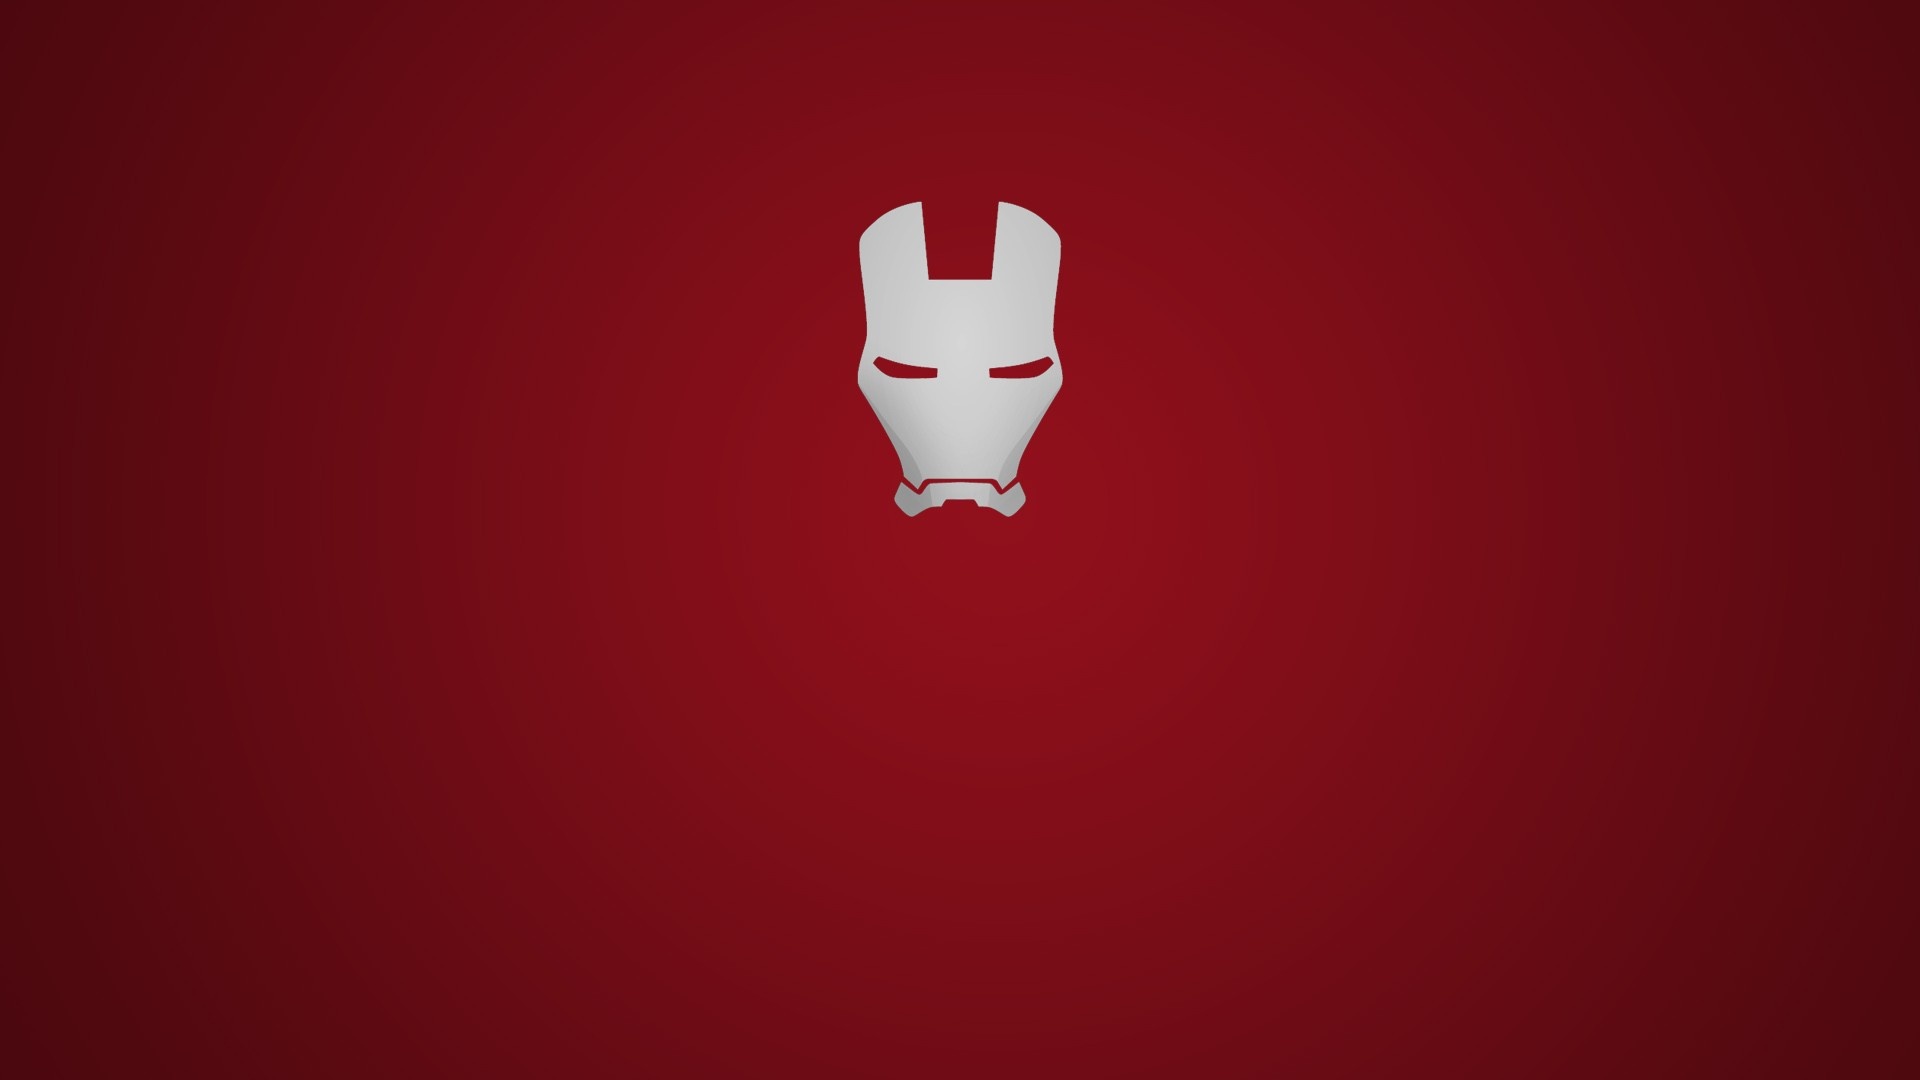 Iron Man logo illustrations, Red and light imagery, Darkness and power, Computer wallpaper, 1920x1080 Full HD Desktop